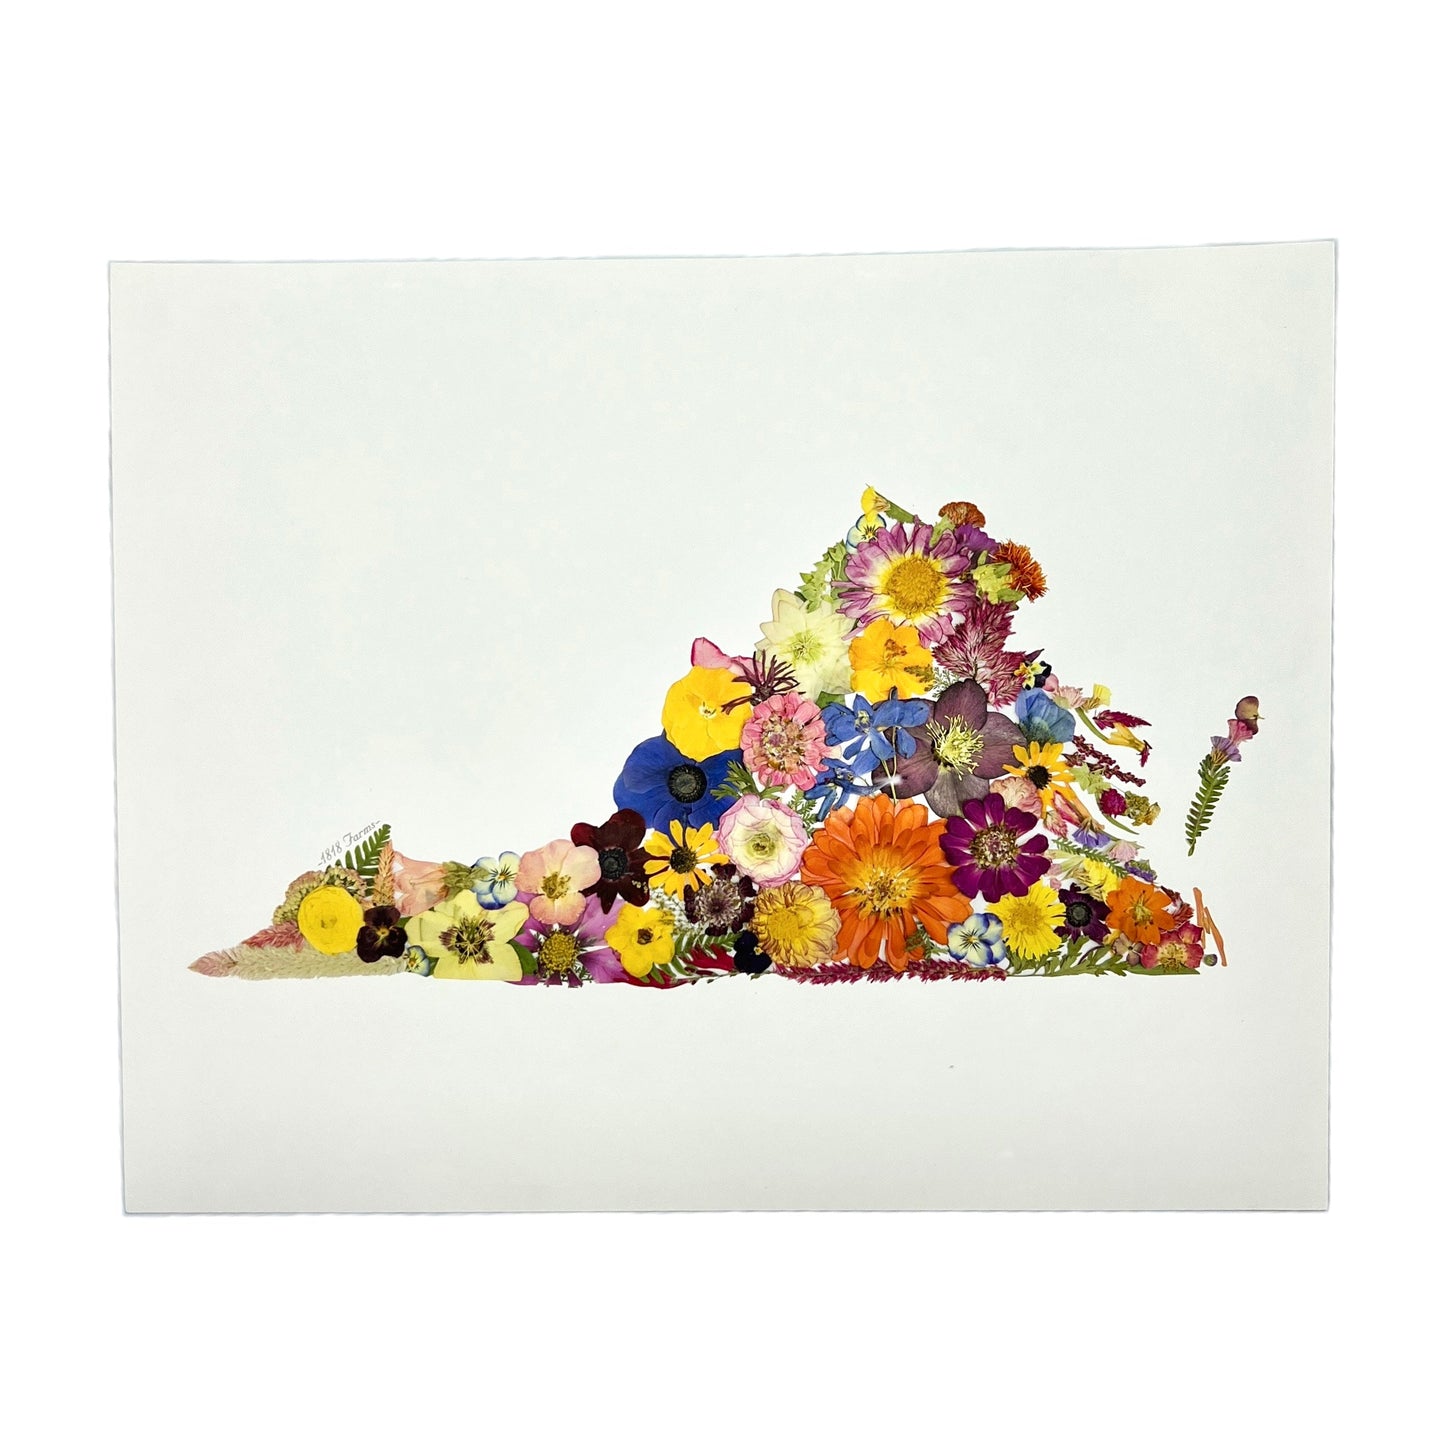 State Themed Giclée Print  - "Where I Bloom" Collection Giclee Art Print 1818 Farms 8"x10" Virginia 